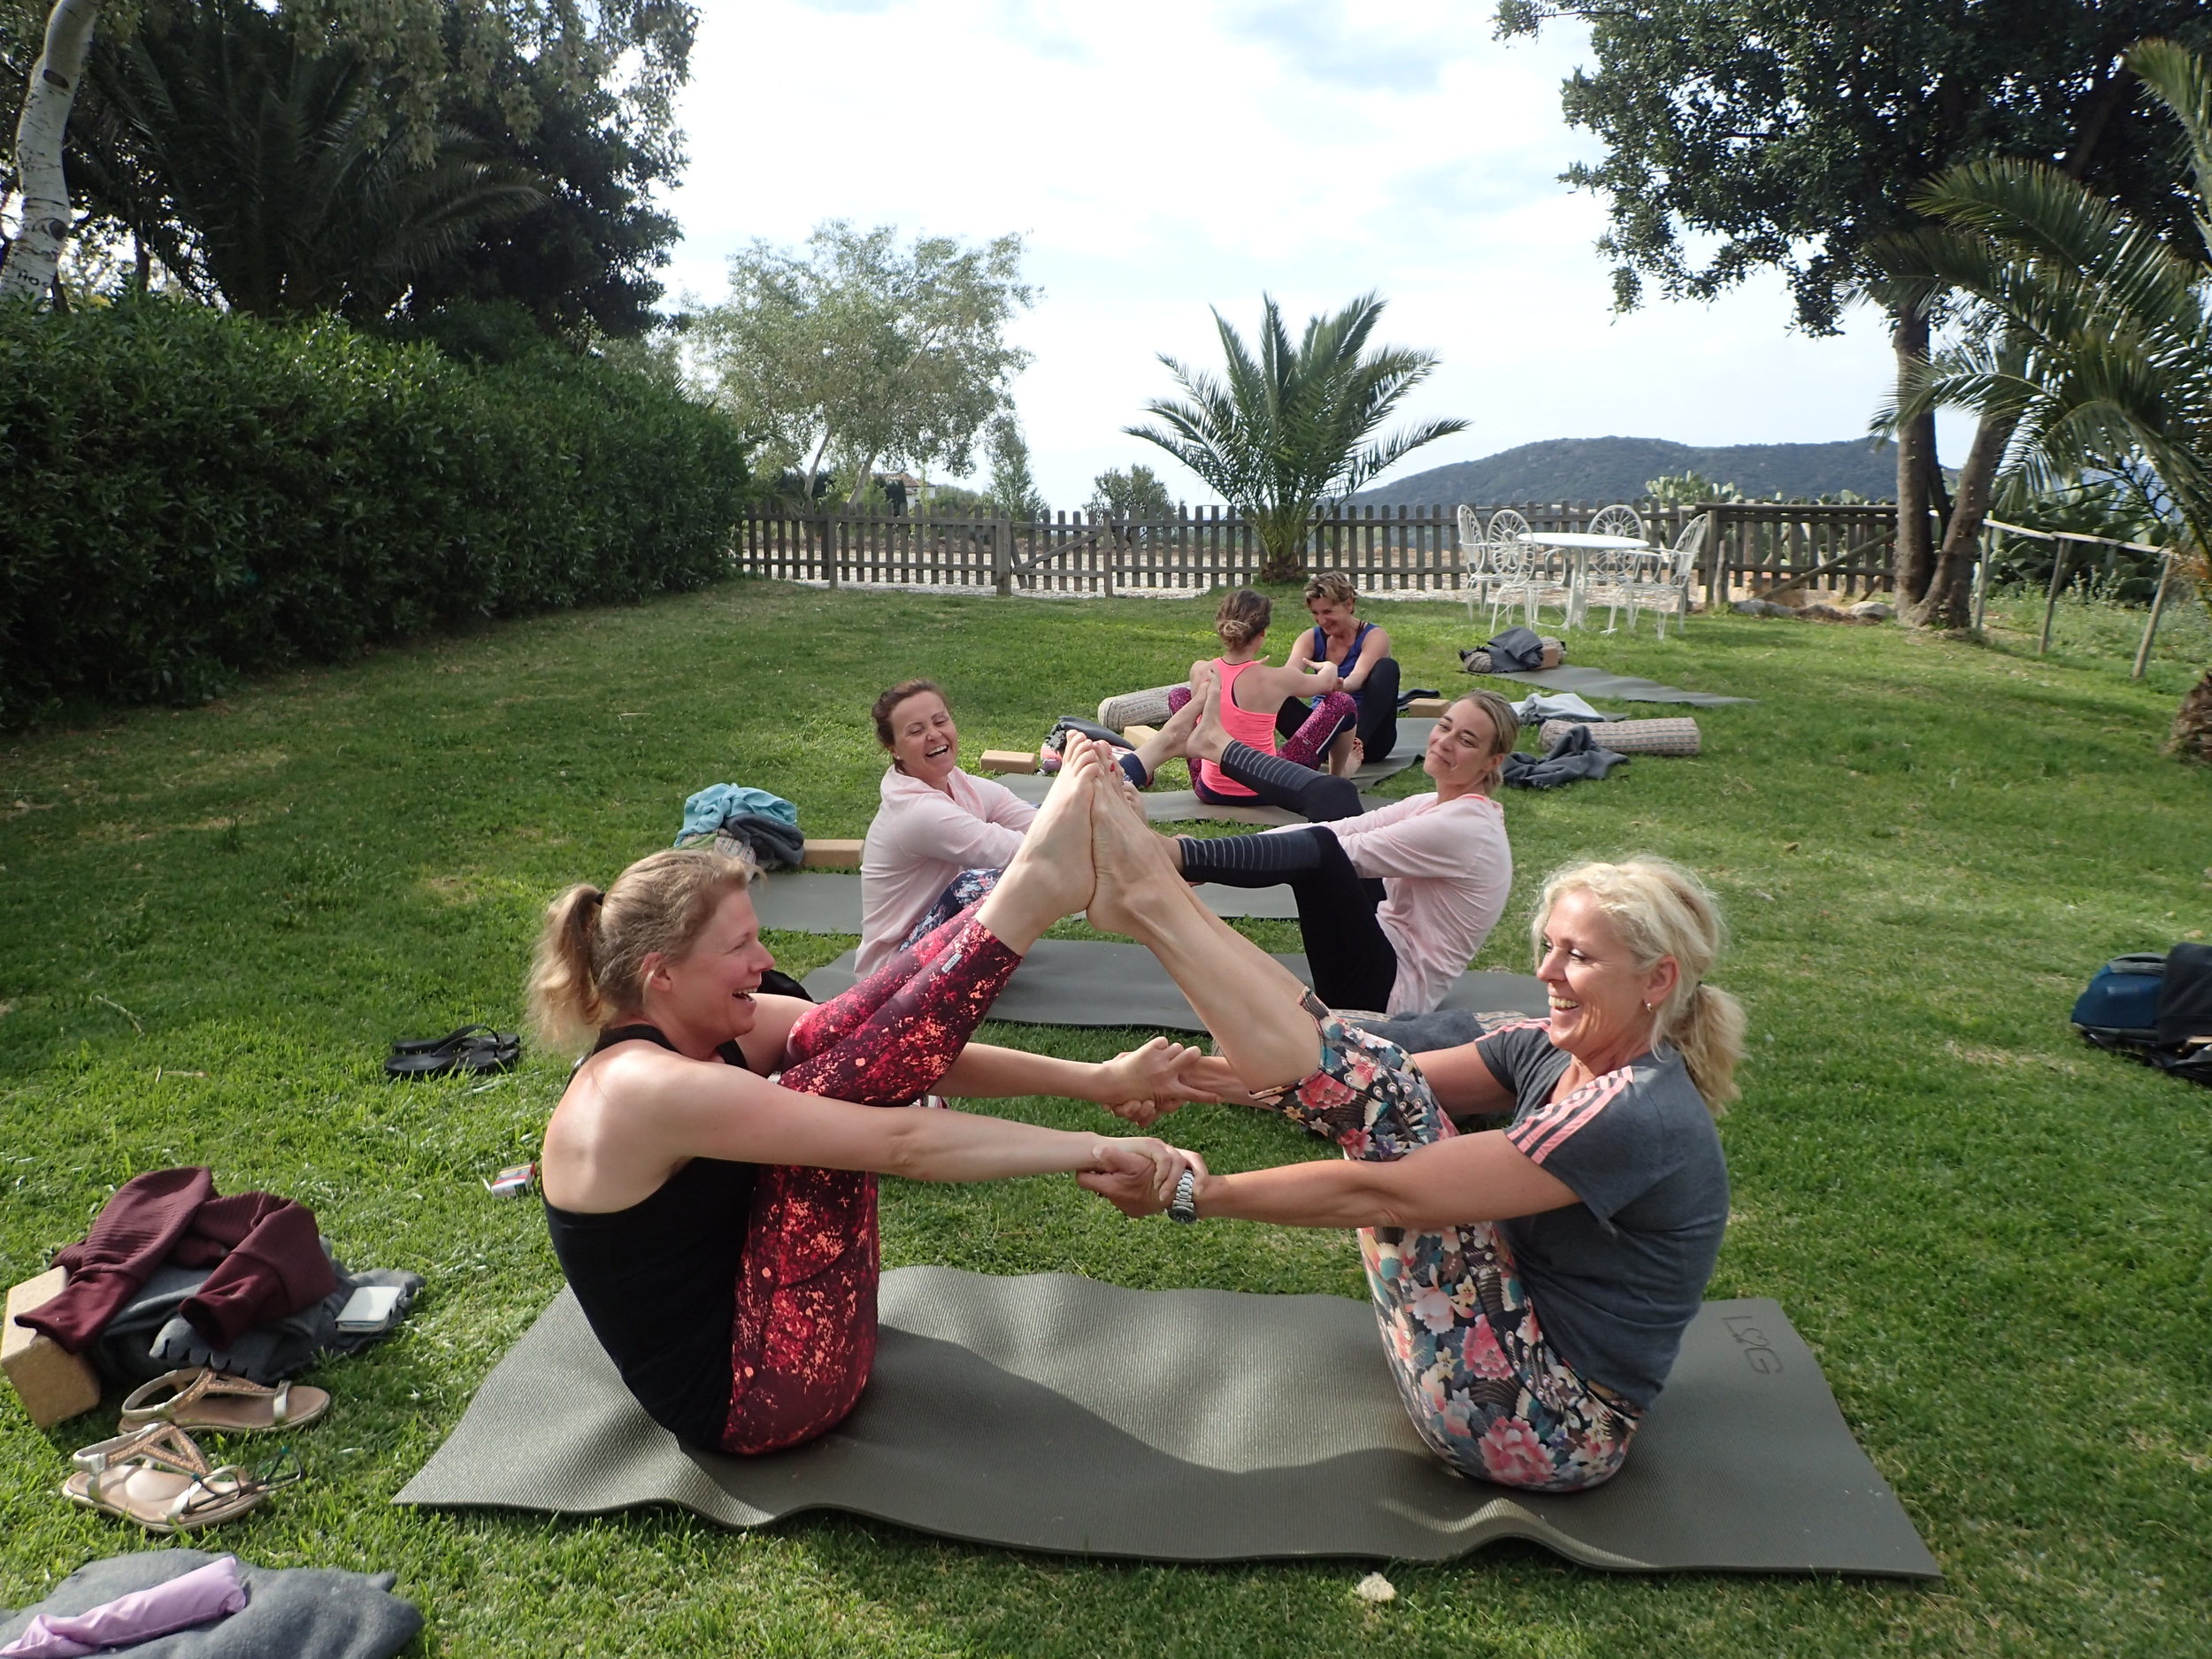 Partner yoga in the garden at Yin Yang Yoga retreat in the Malaga mountains in Spain with Jane Bakx Yoga